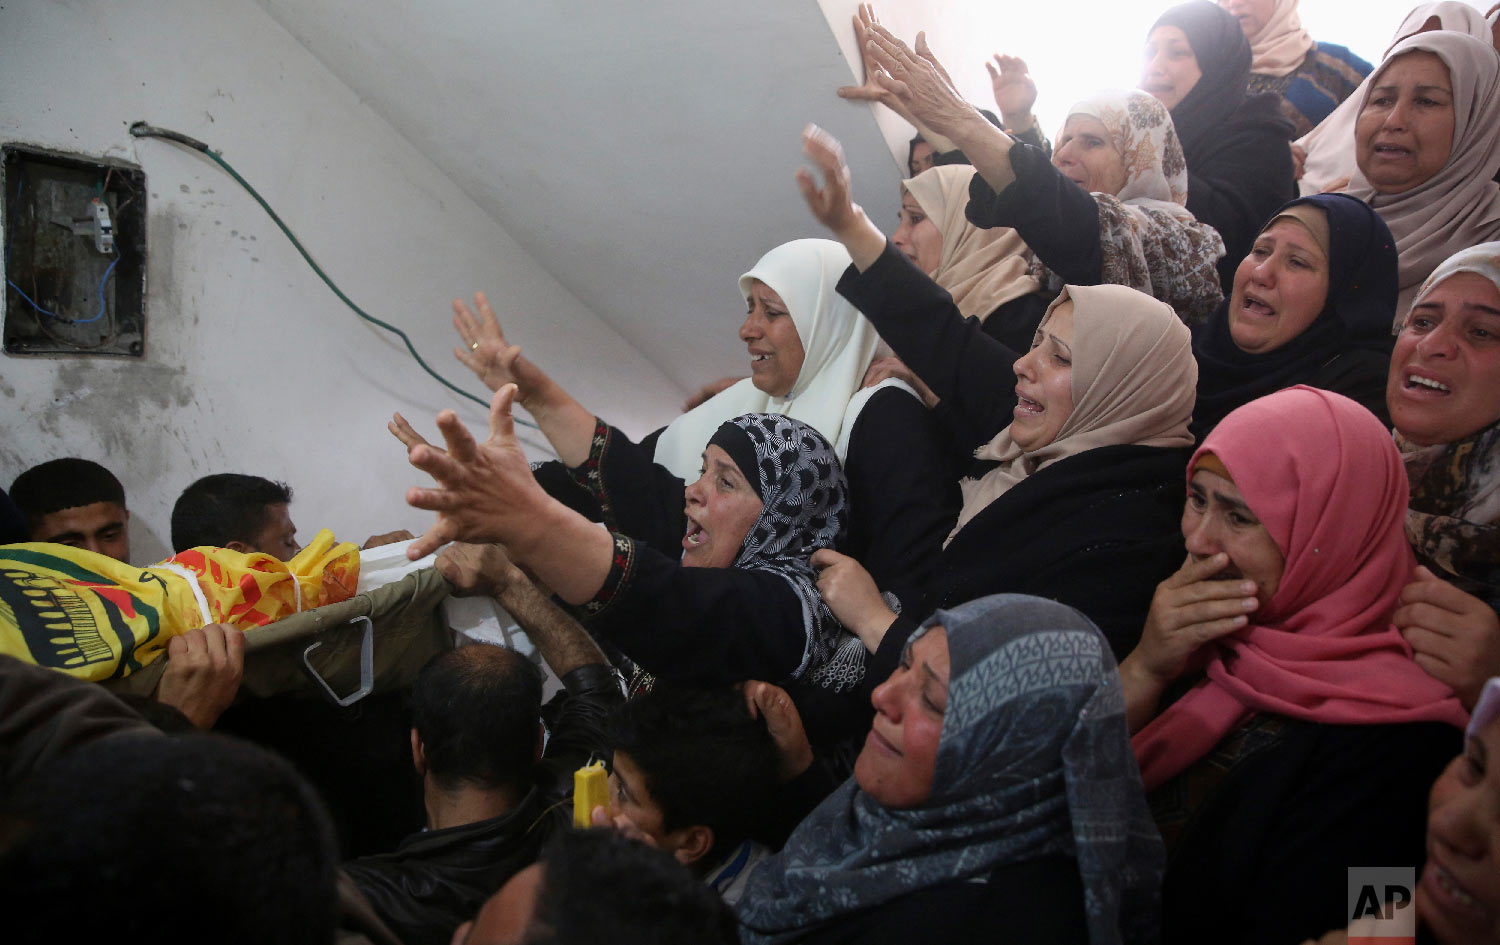  Relatives mourn over the body of Hamdan Abu Amsha, 23, during his funeral at the family house in Beit Hanoun, Gaza Strip, Saturday, March 31, 2018. Israel will target "terror organizations" in Gaza if violence along the territory's border with Israel drags on, the chief military spokesman warned Saturday, a day after thousands of Palestinians staged protests near the border fence. (AP Photo/Adel Hana) 